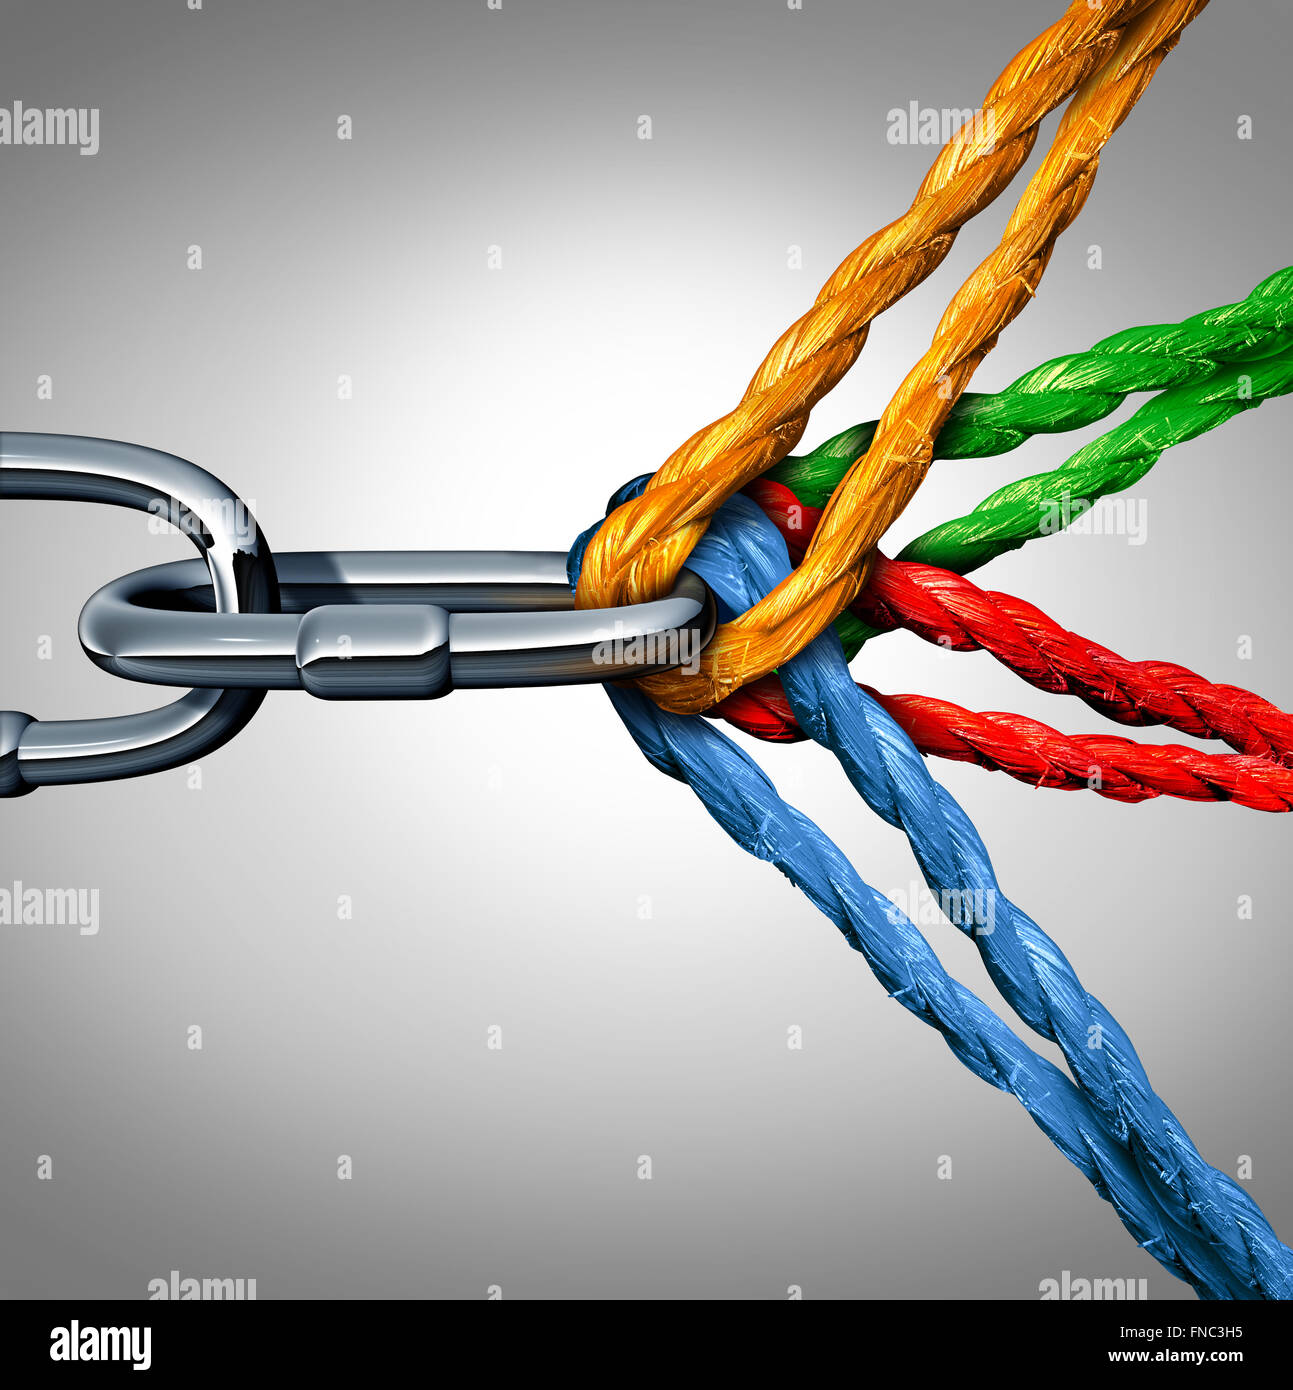 Concept of connection as a connected group symbol with different ropes tied and linked together pulling on a metal chain as an unbreakable link as a community trust and faith metaphor. Stock Photo